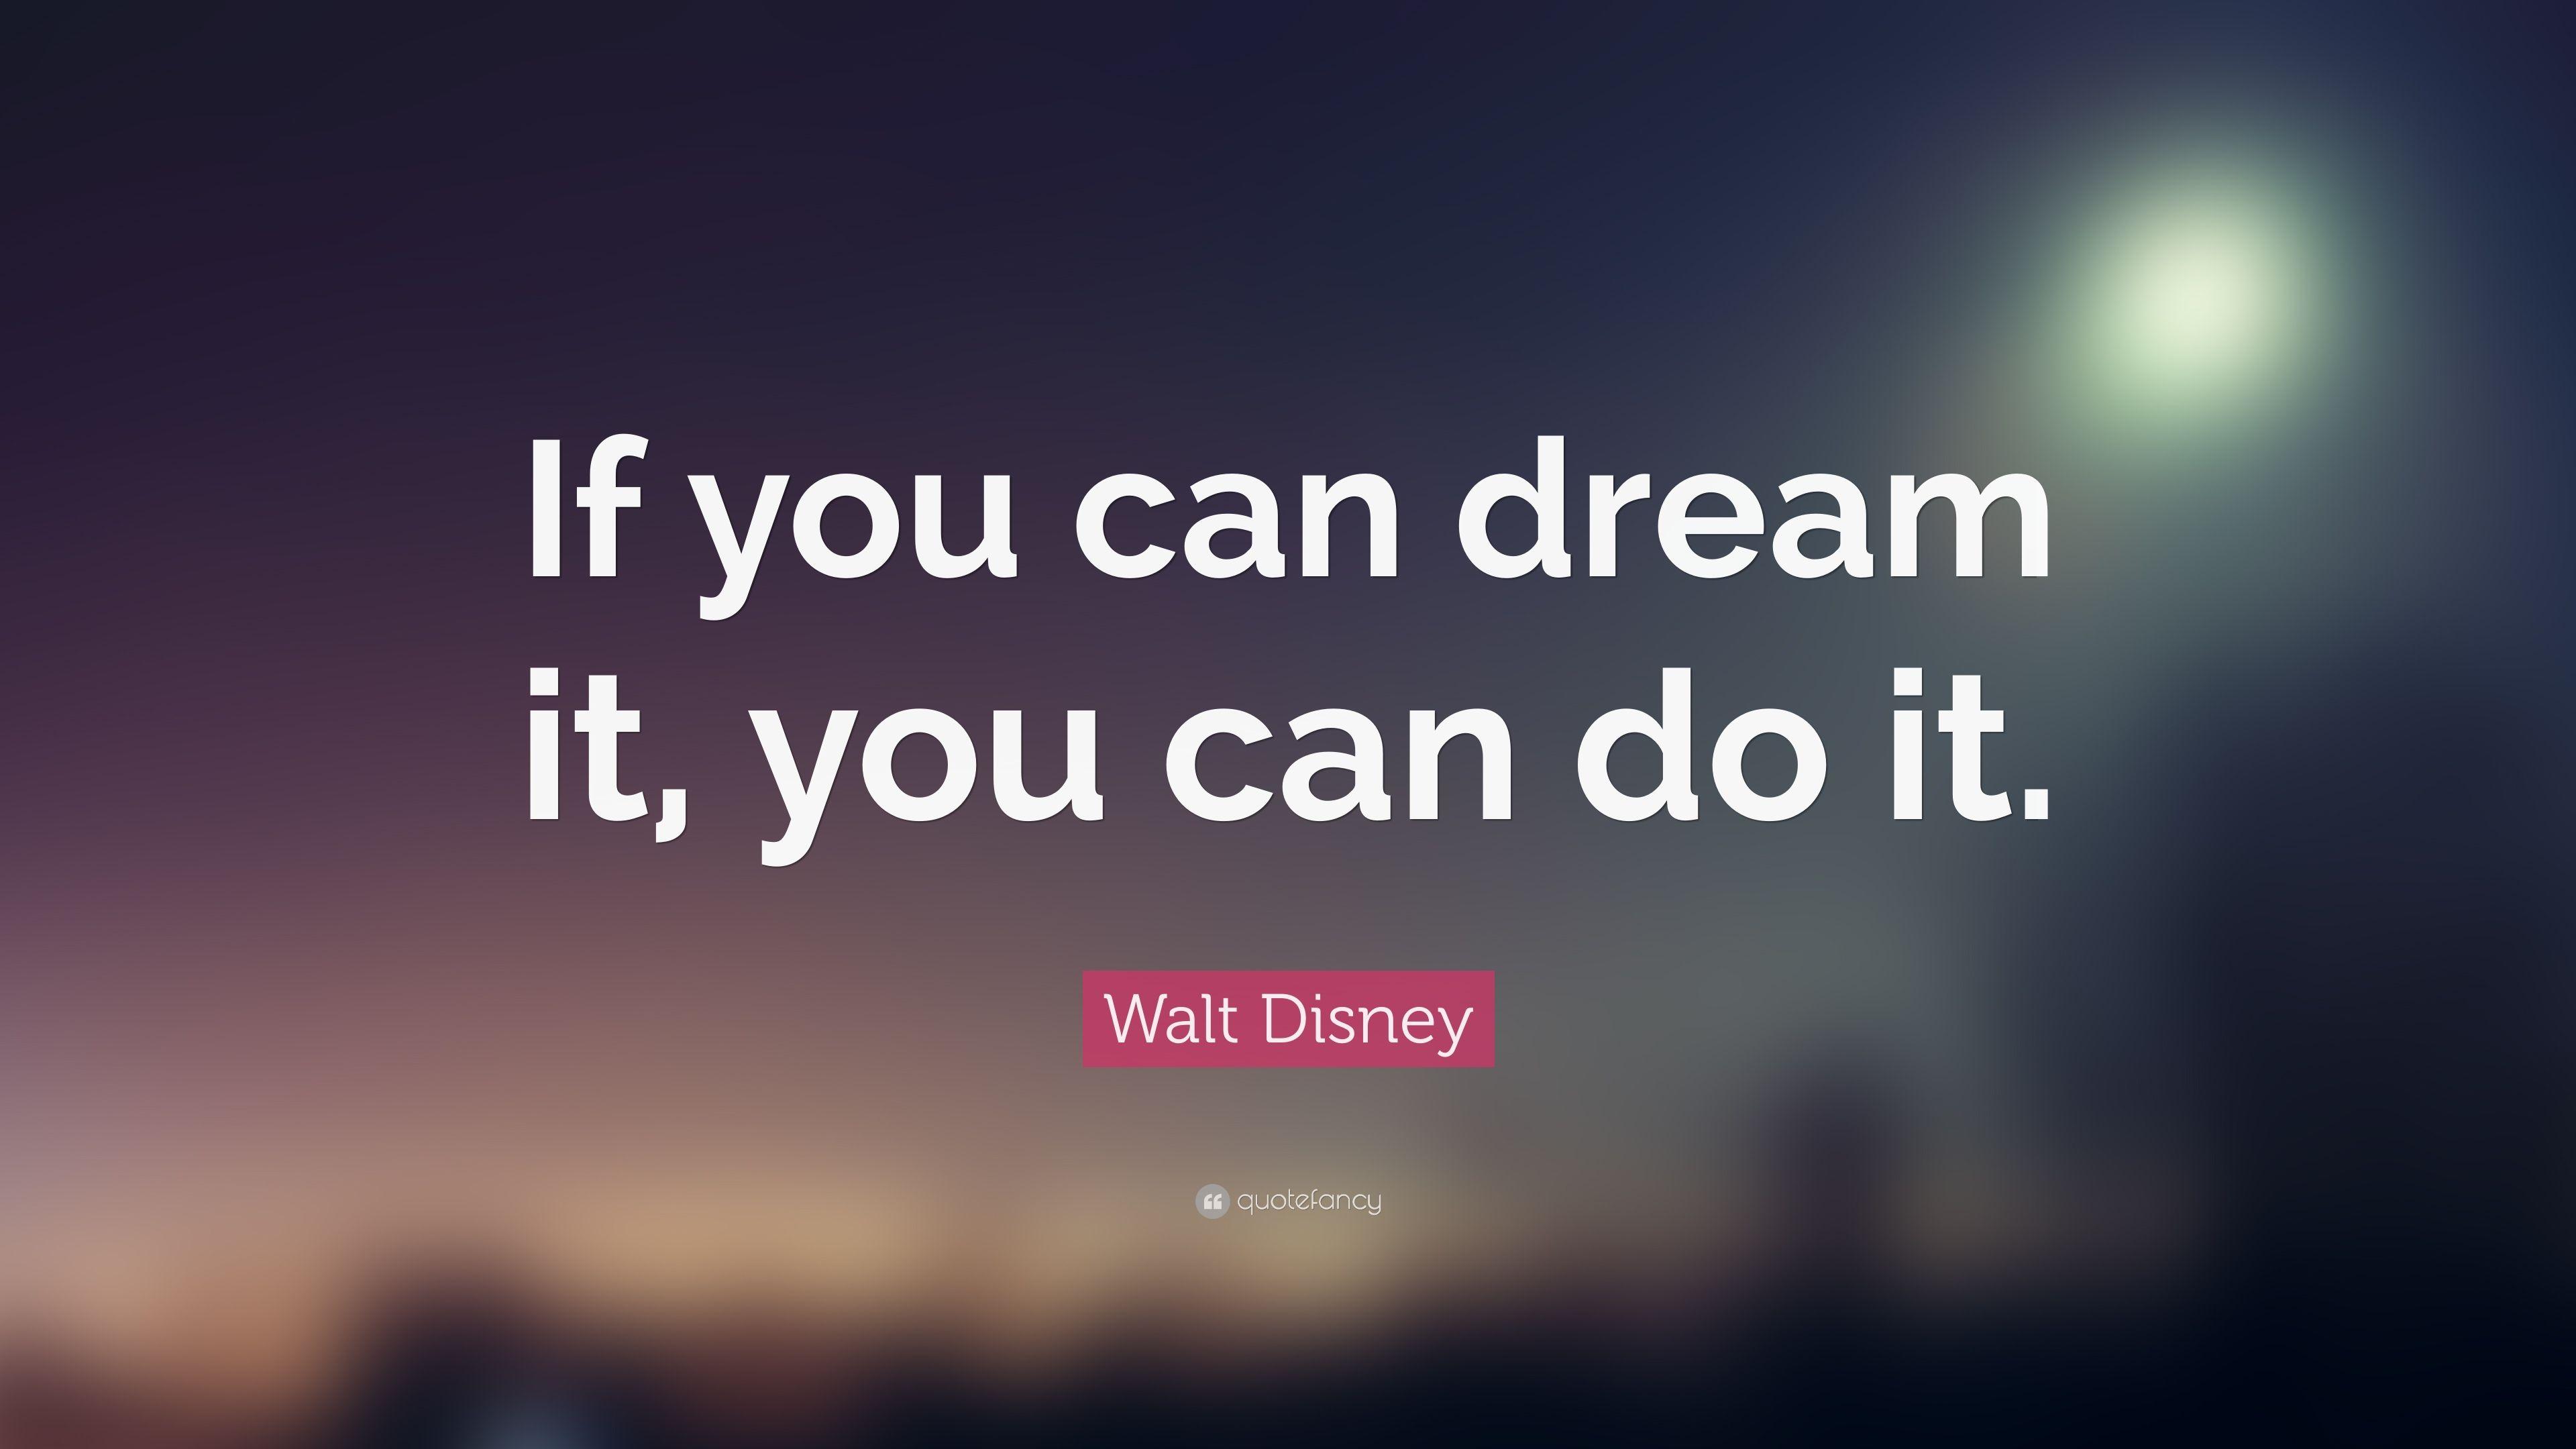 Walt Disney Quote: “If you can dream it, you can do it.” 23